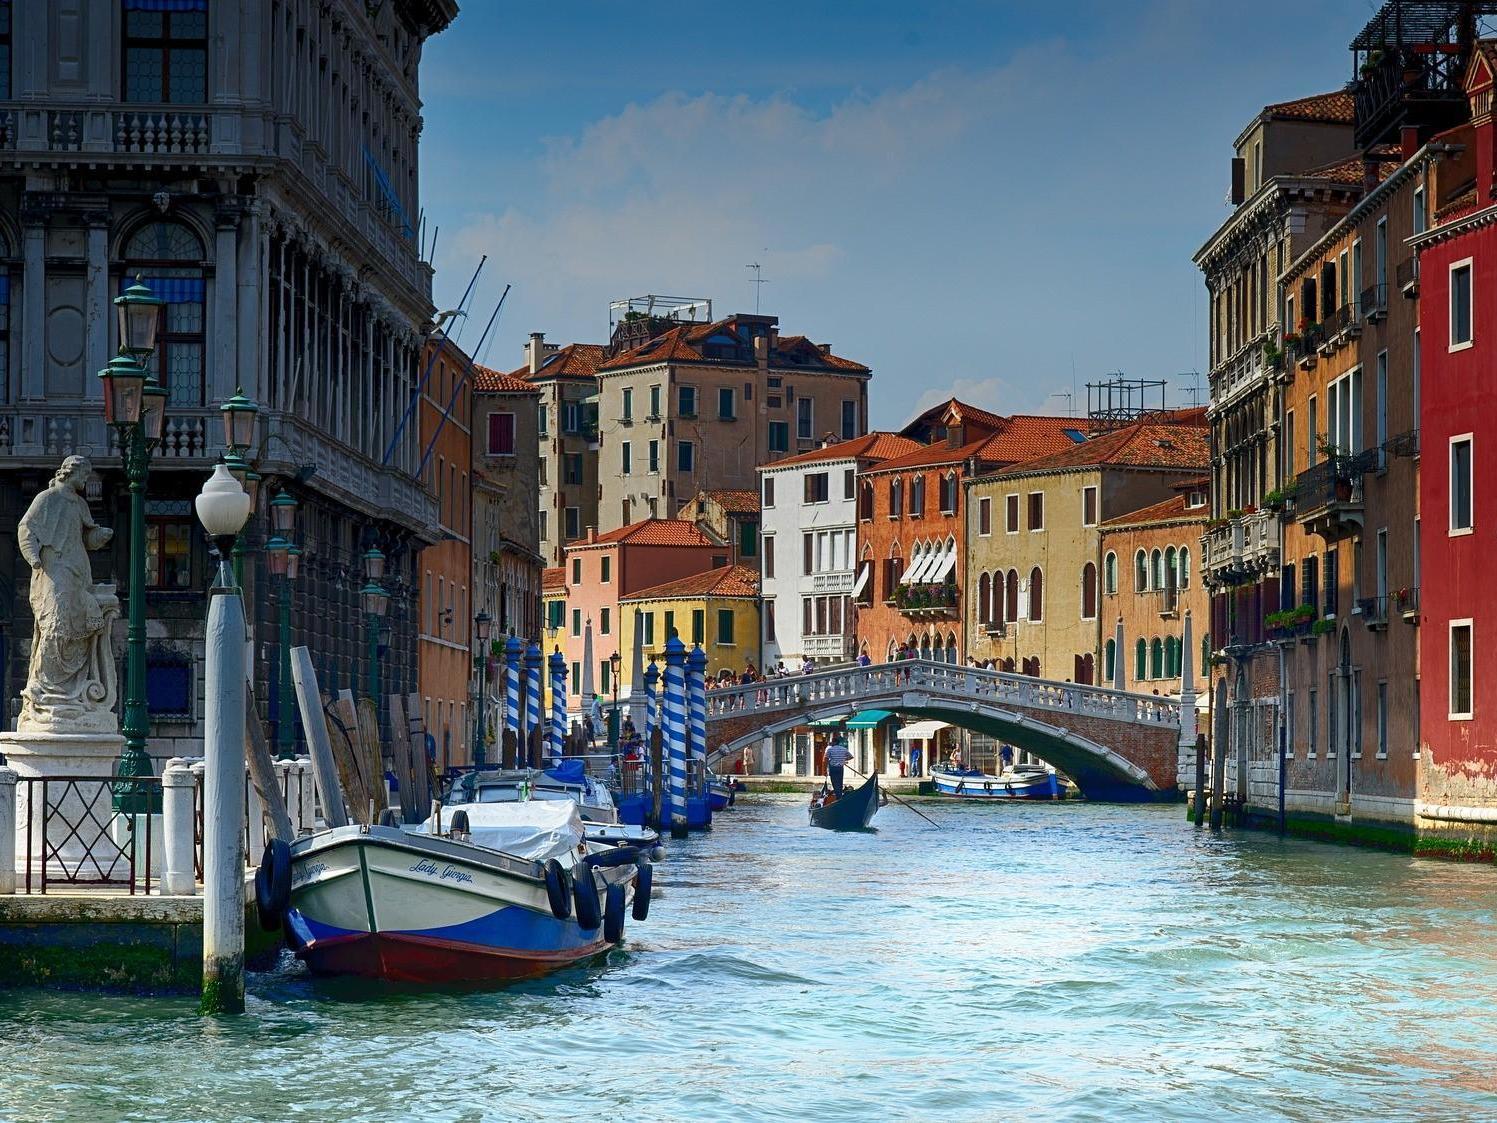 Leave the Grand Canal for Venice’s Lido